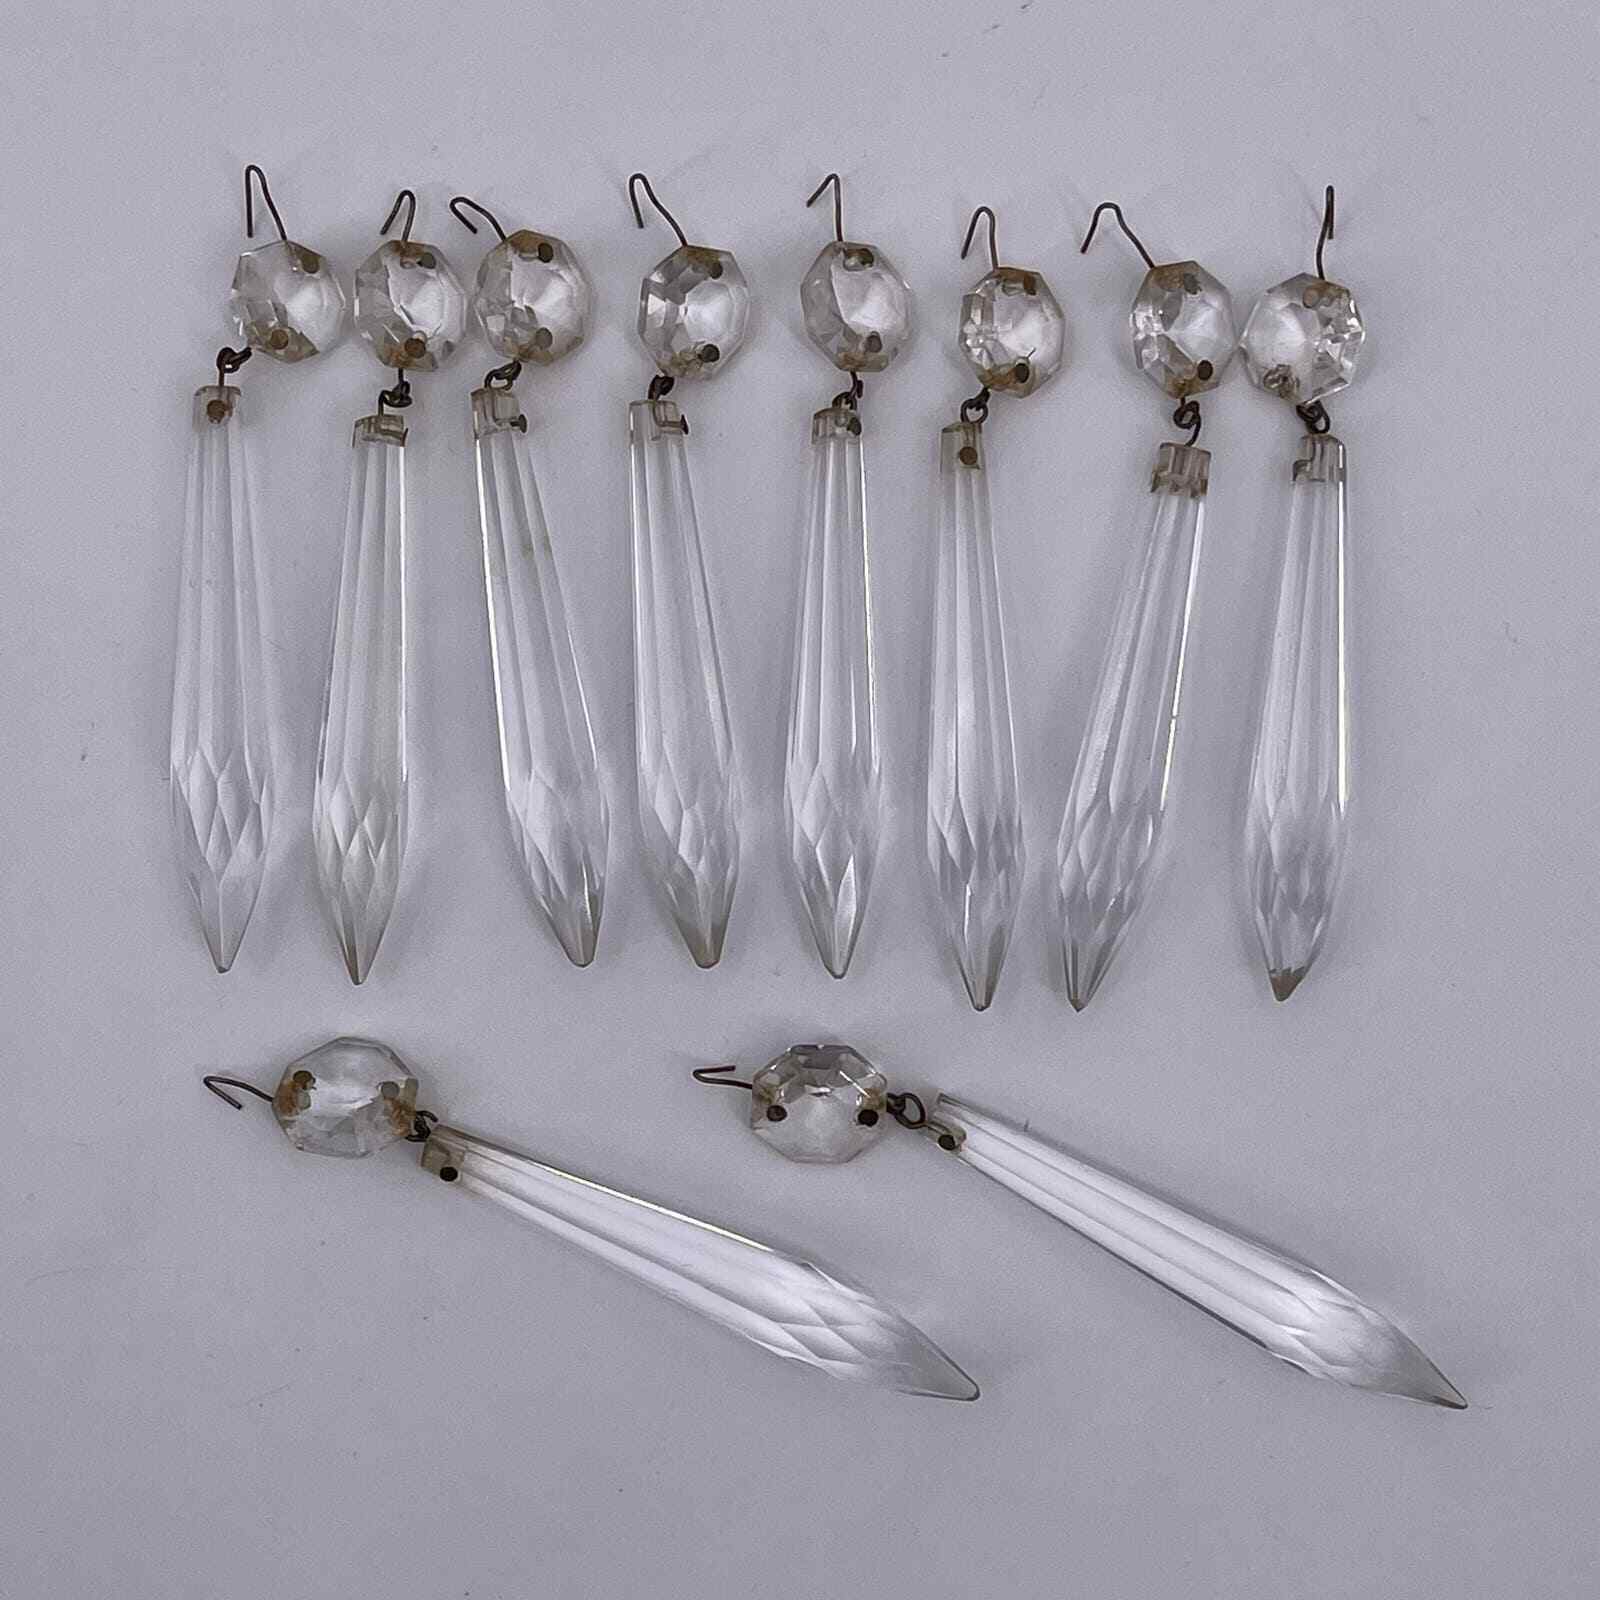 Lot of 10 Antique Glass Chandelier Dangles Icicle Spear Shaped Prisms Cut Glass